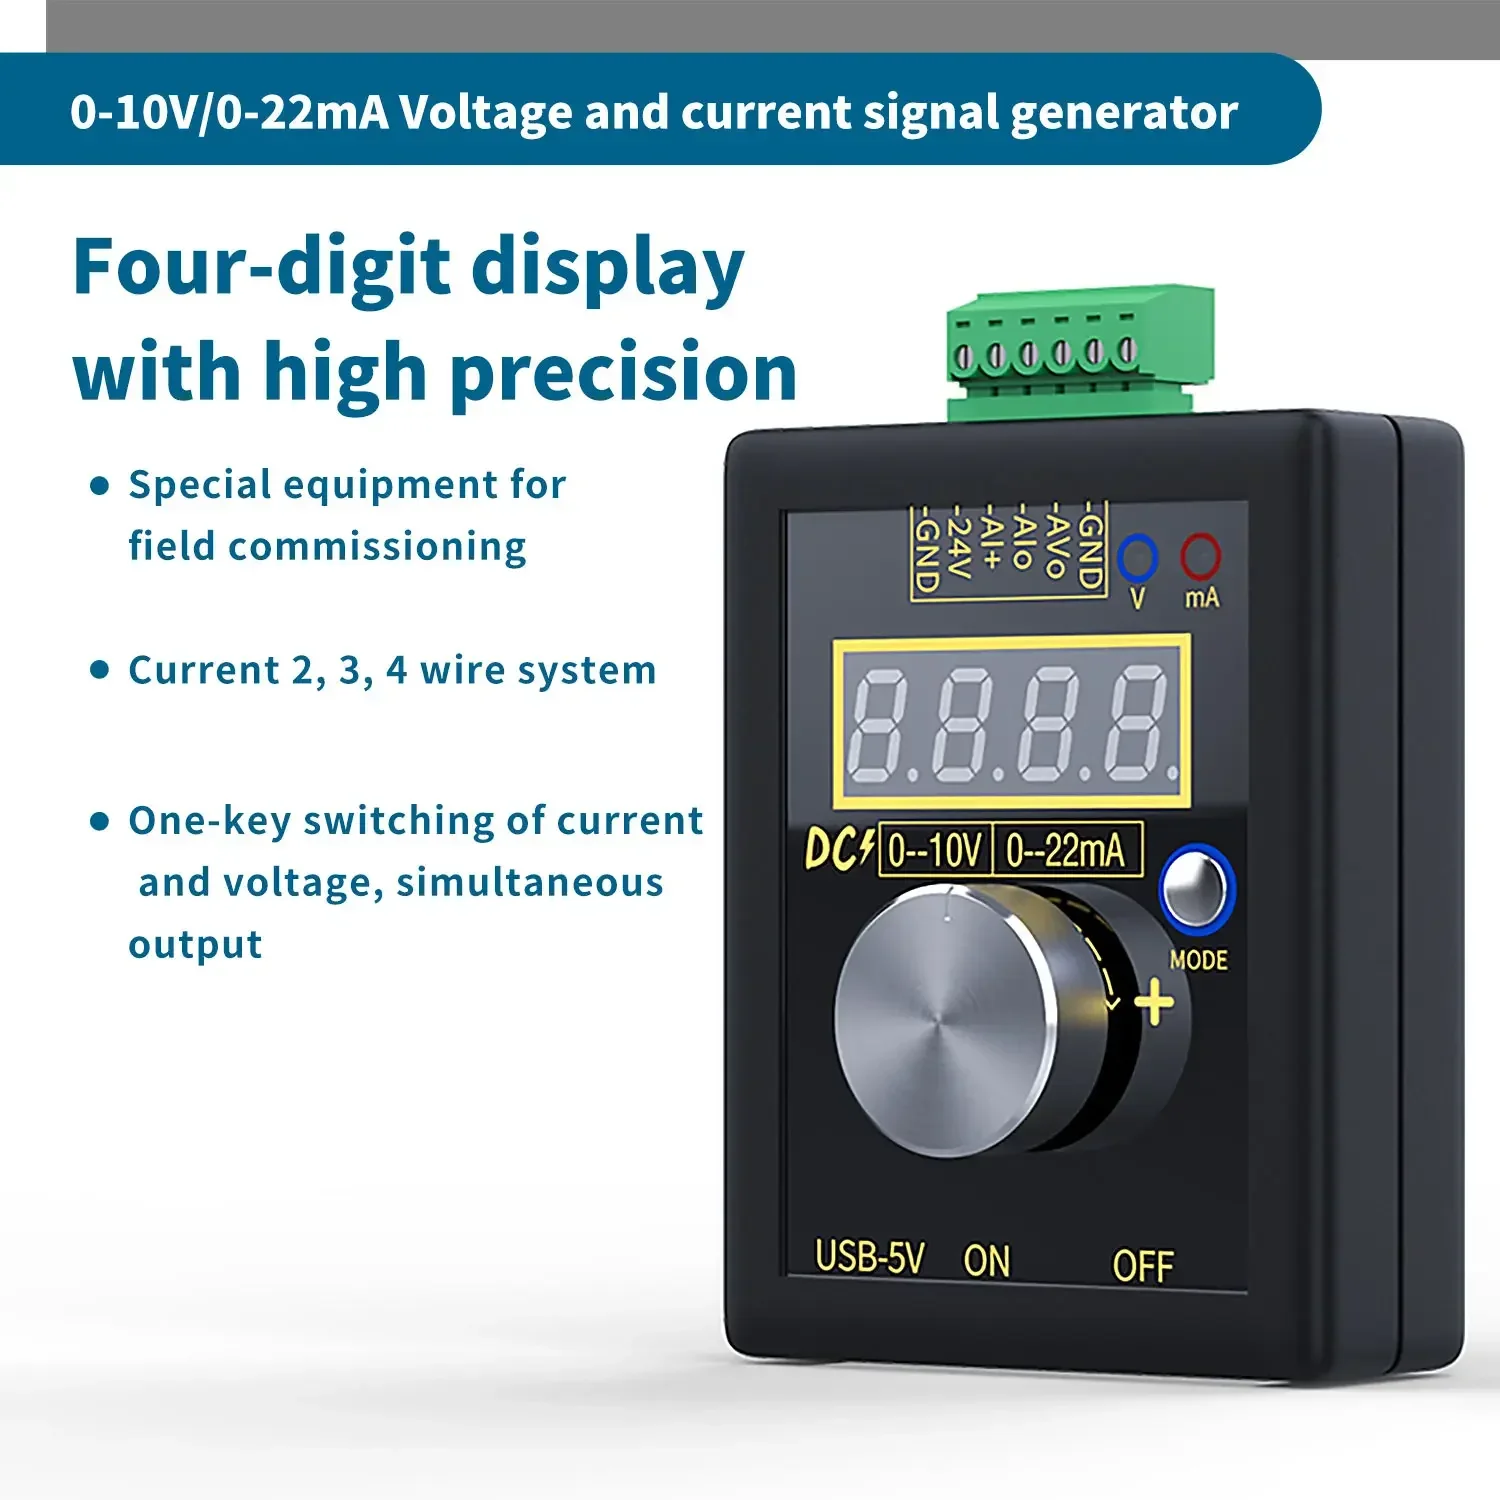 

Generator Current Voltage 4-20ma Generators Electronic Instruments Measuring Signal Tool 0-10v/ Precision Professional High